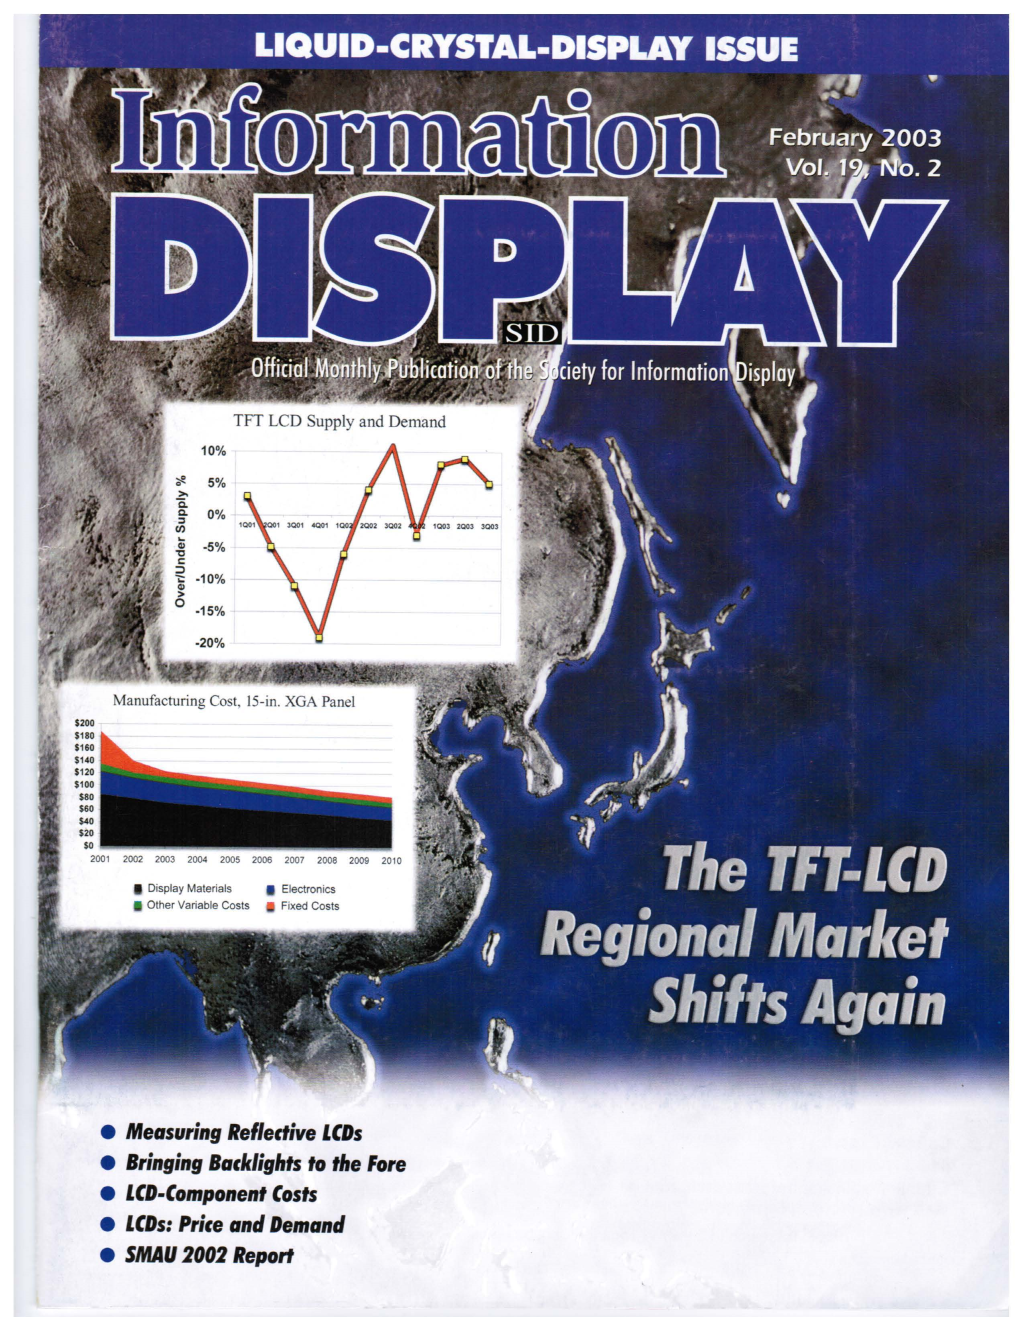 Measuring Reflective Lcds • Bringing Backlights to the Fore • LCD-Component Costs • Lcds: Price and Demand E SMAU 2002 Report FEBRUARY 2003 Information VOL